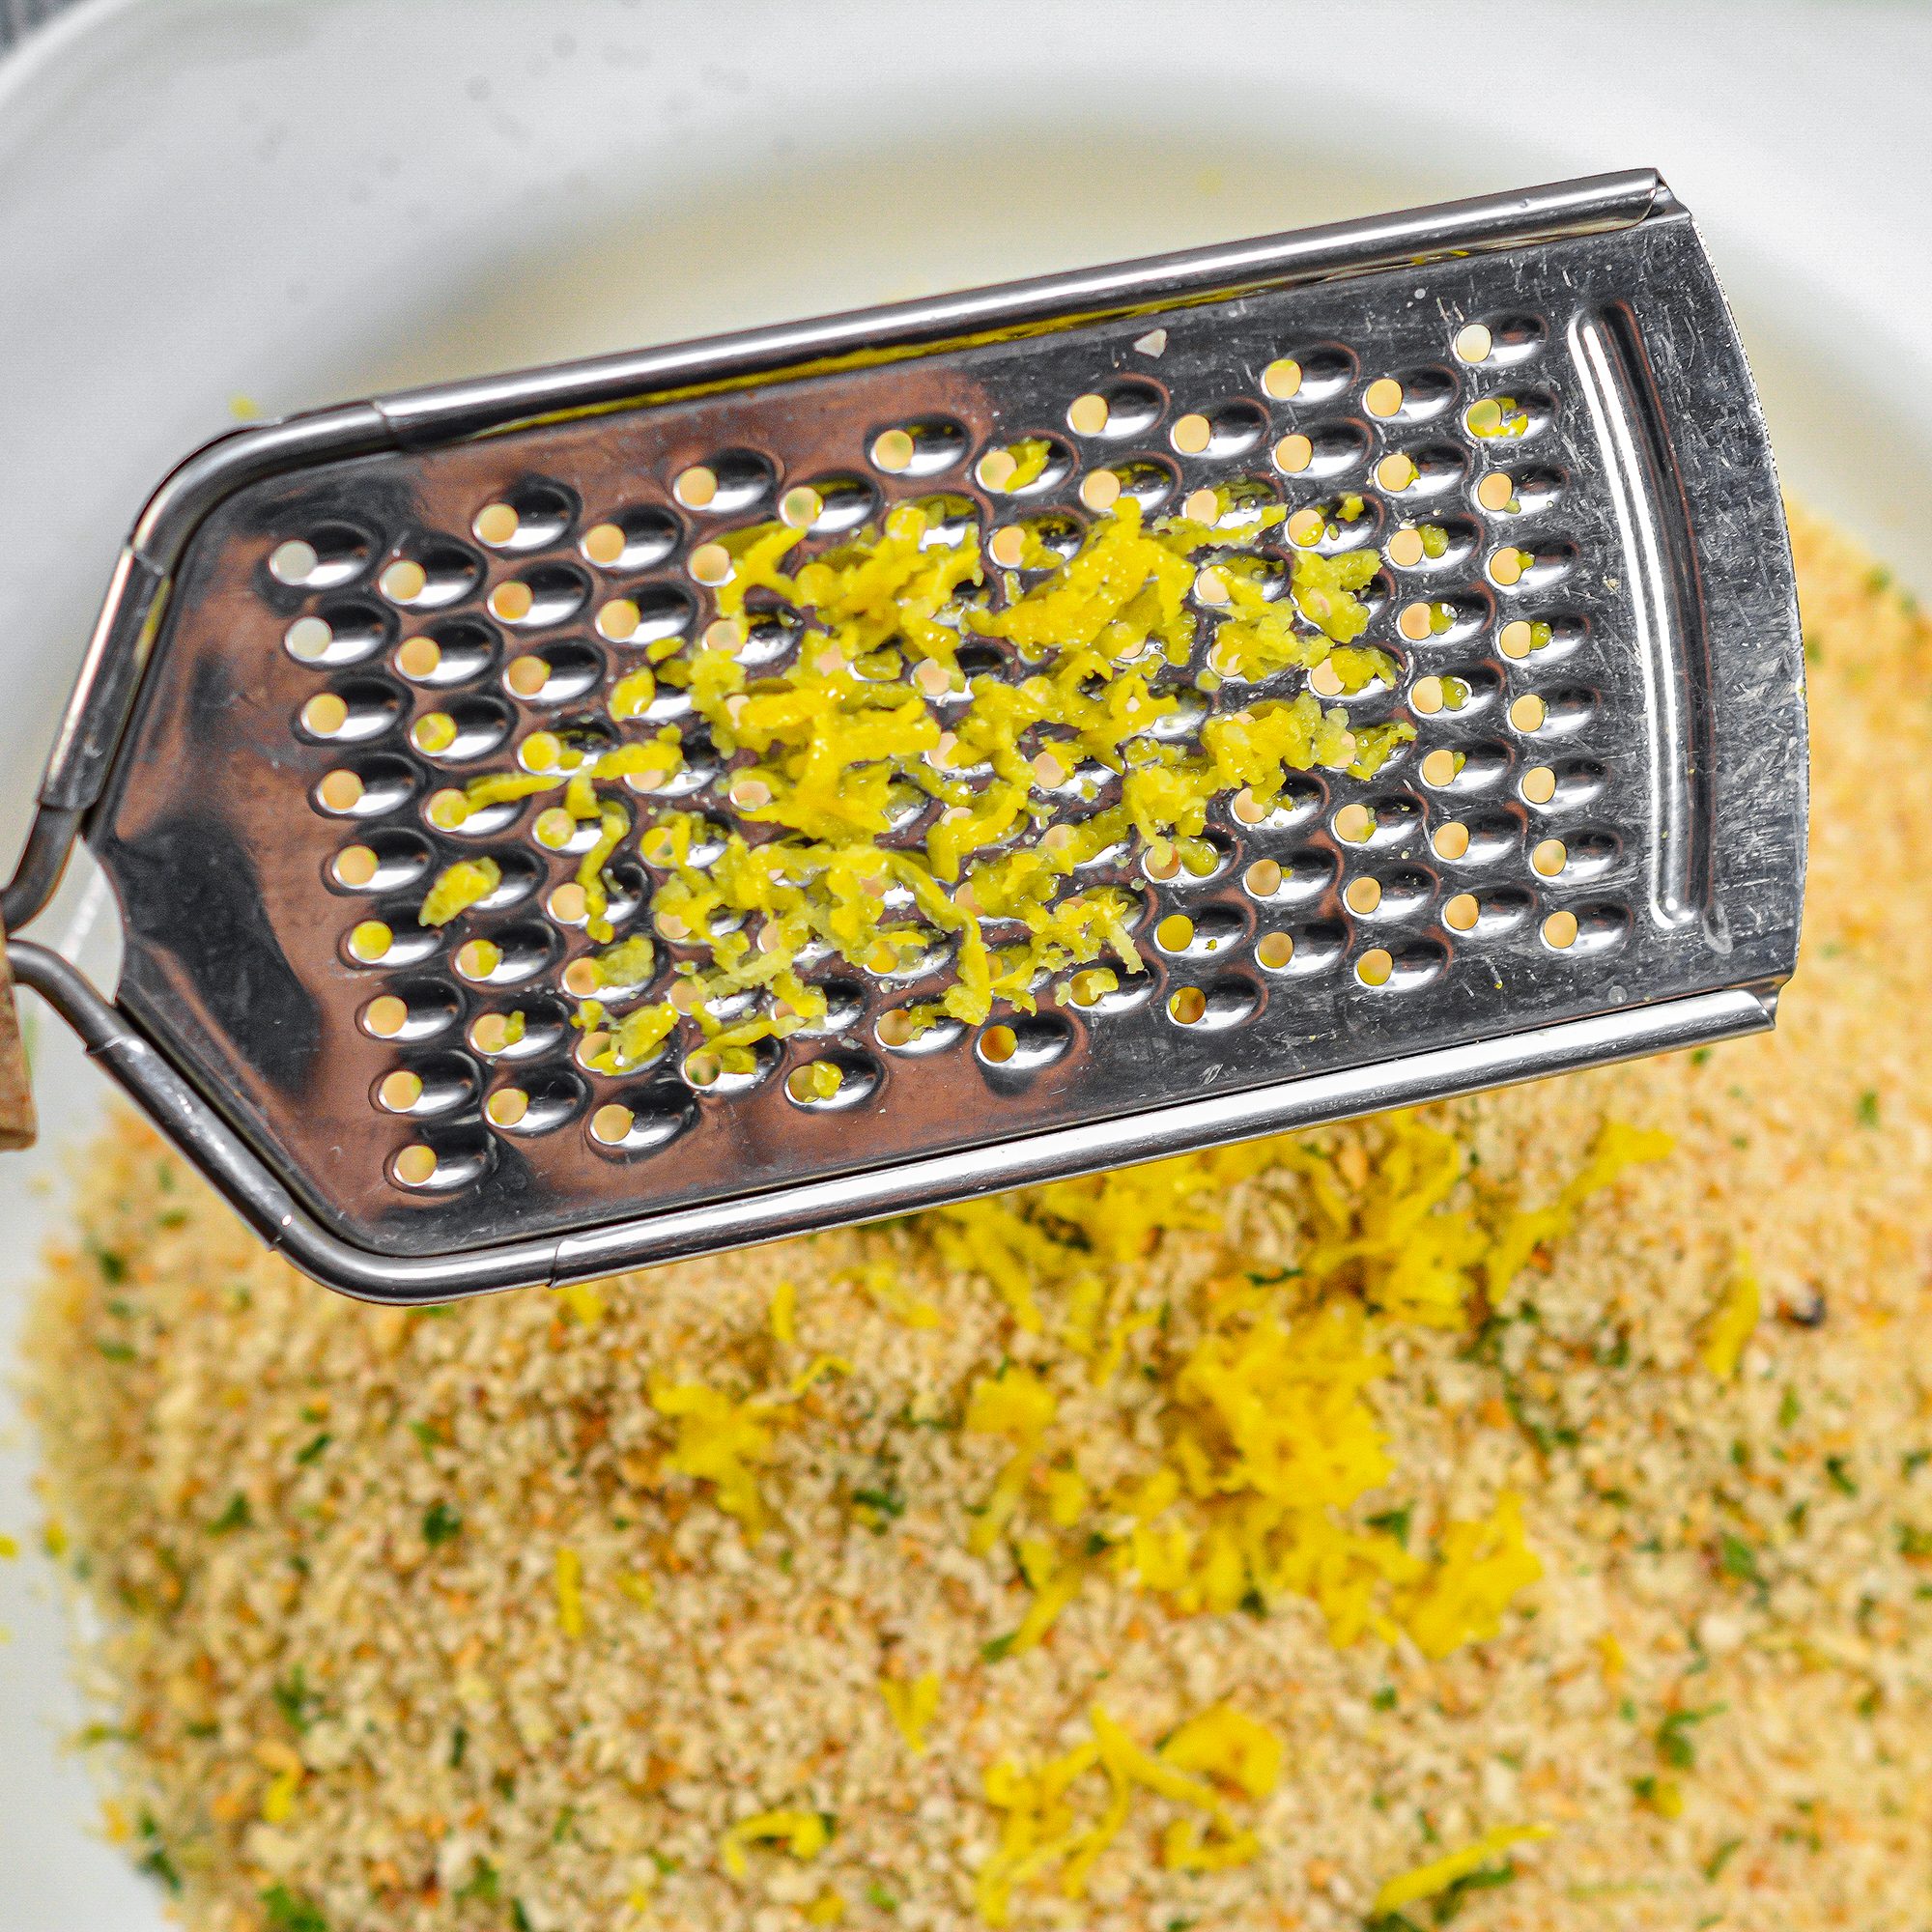 Add the breadcrumbs and lemon zest to another plate, and mix together well.